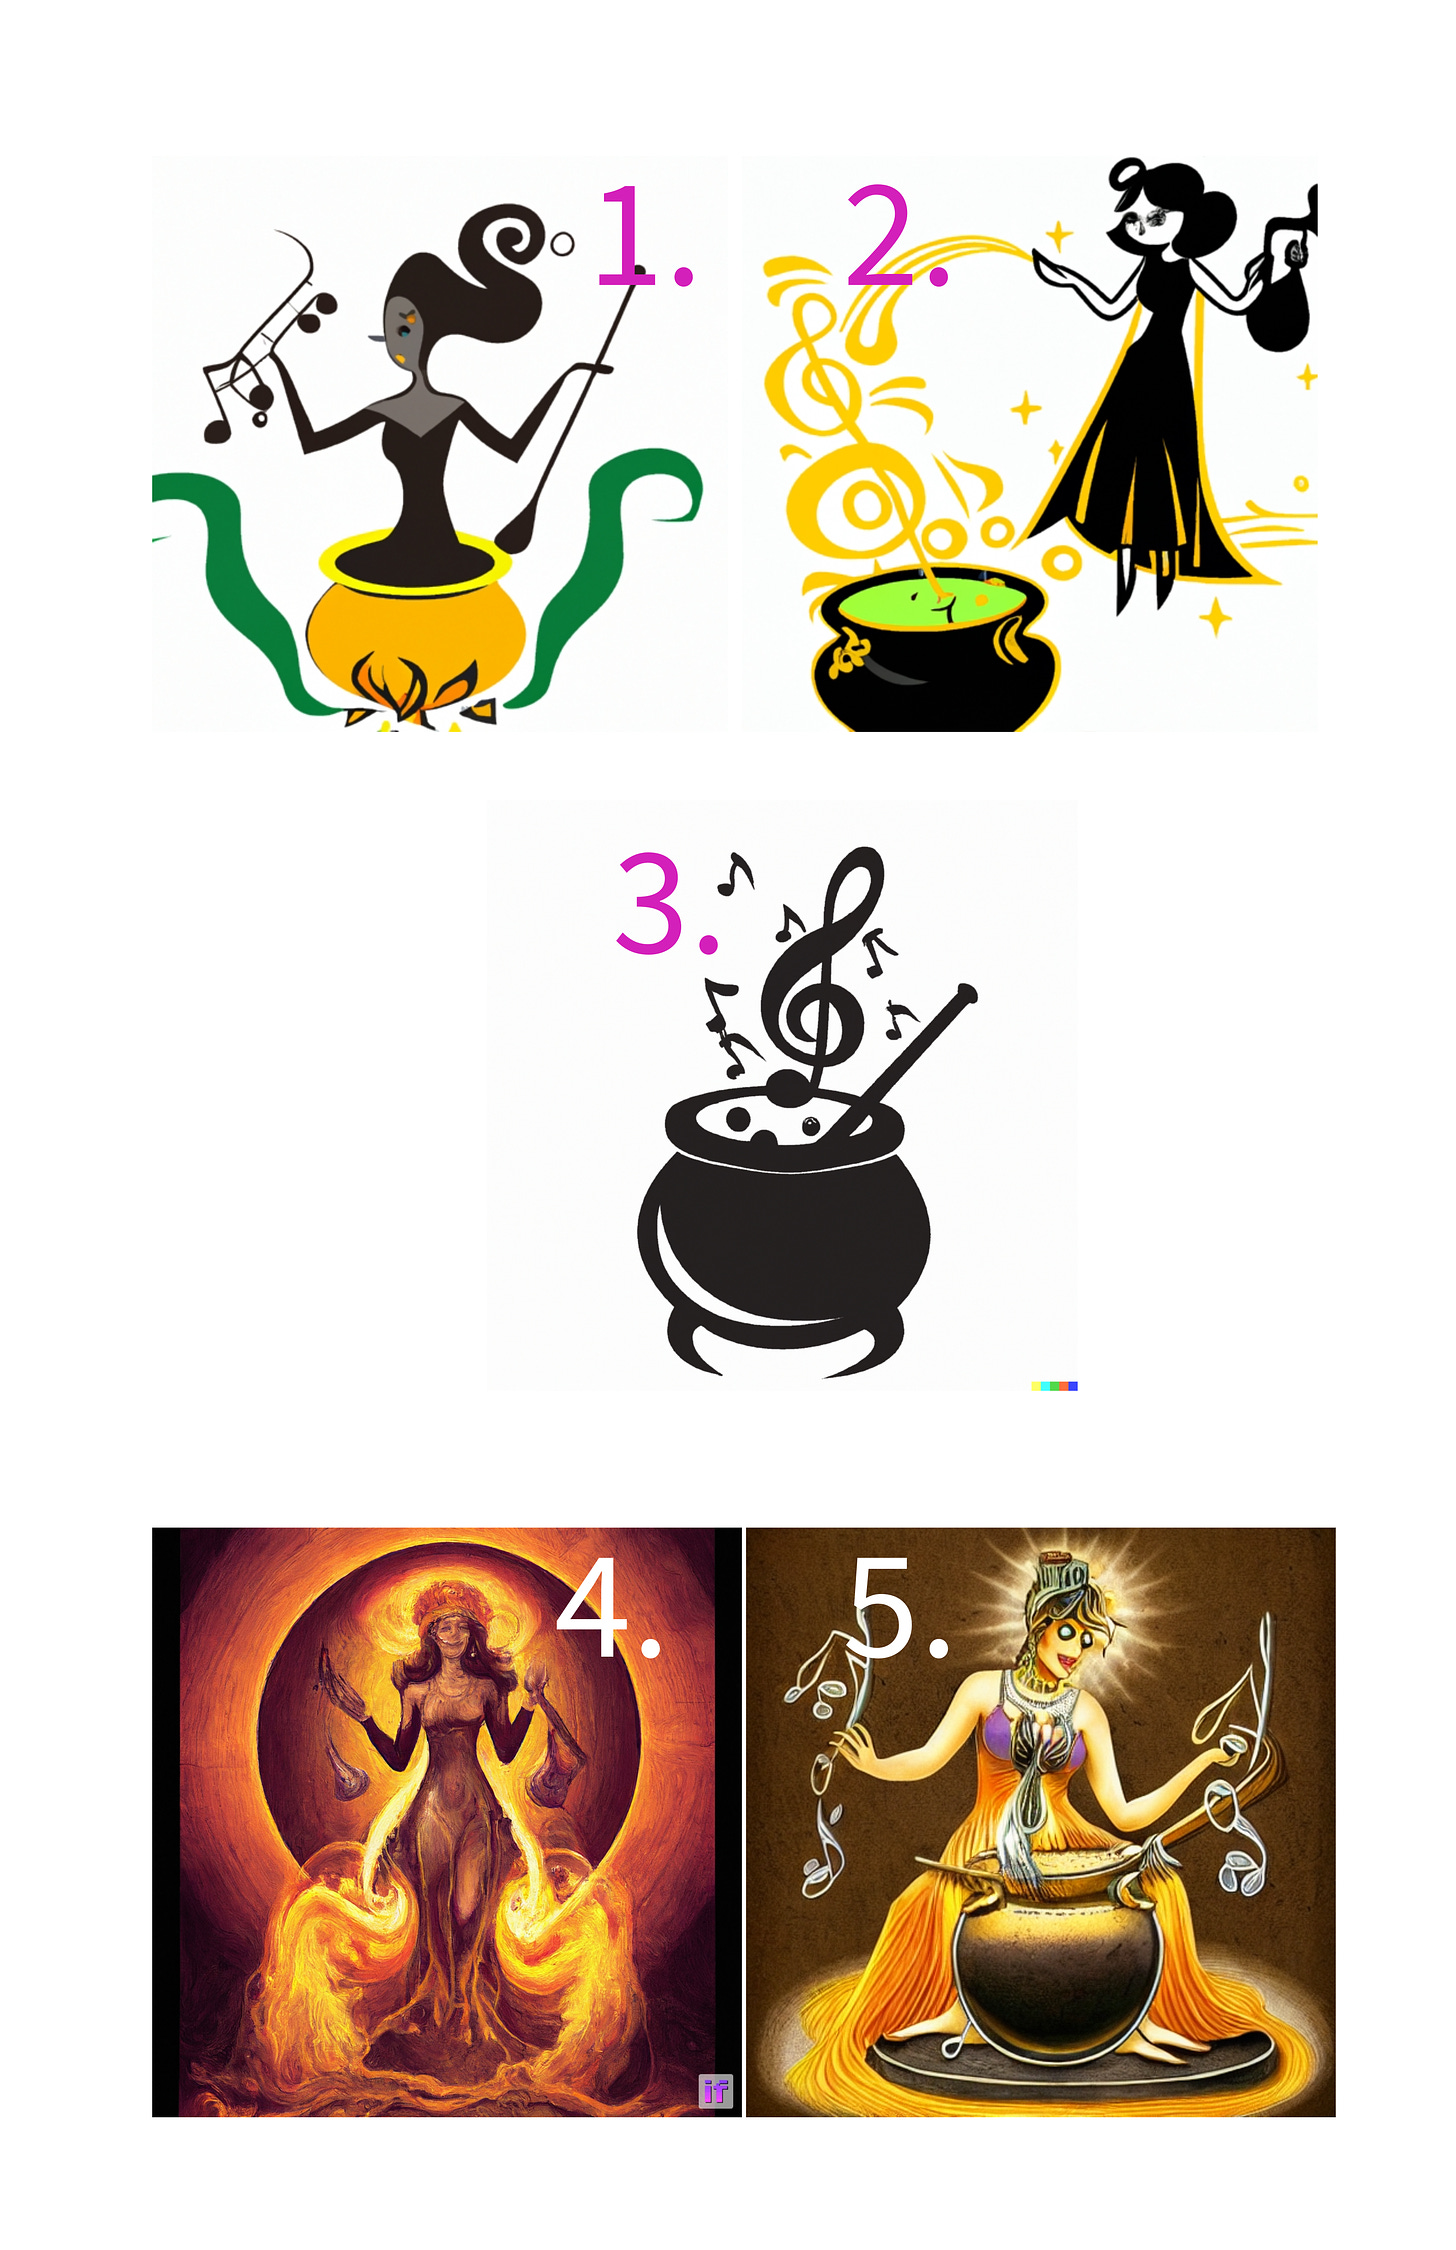 The top two and the bottom two of the logos are all witches conjuring up something in a cauldron with musical notes coming out of it. The one in the middle is just a cauldron with musical notes coming out of it.